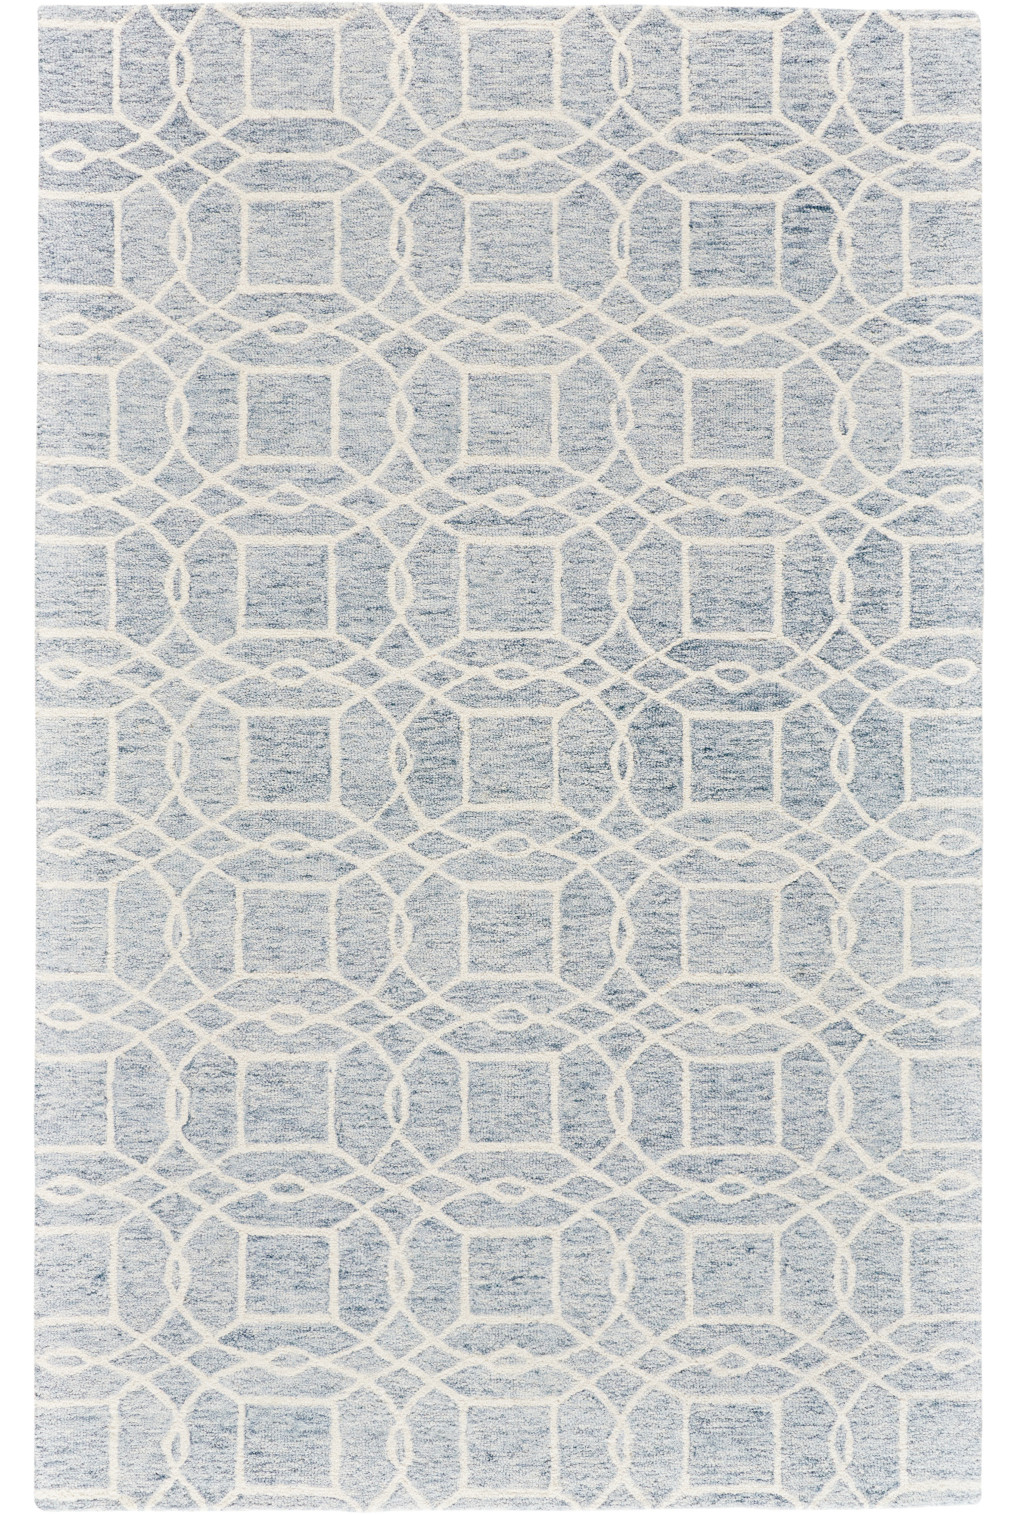 8' X 10' Gray And Ivory Wool Geometric Tufted Handmade Stain Resistant Area Rug-512177-1